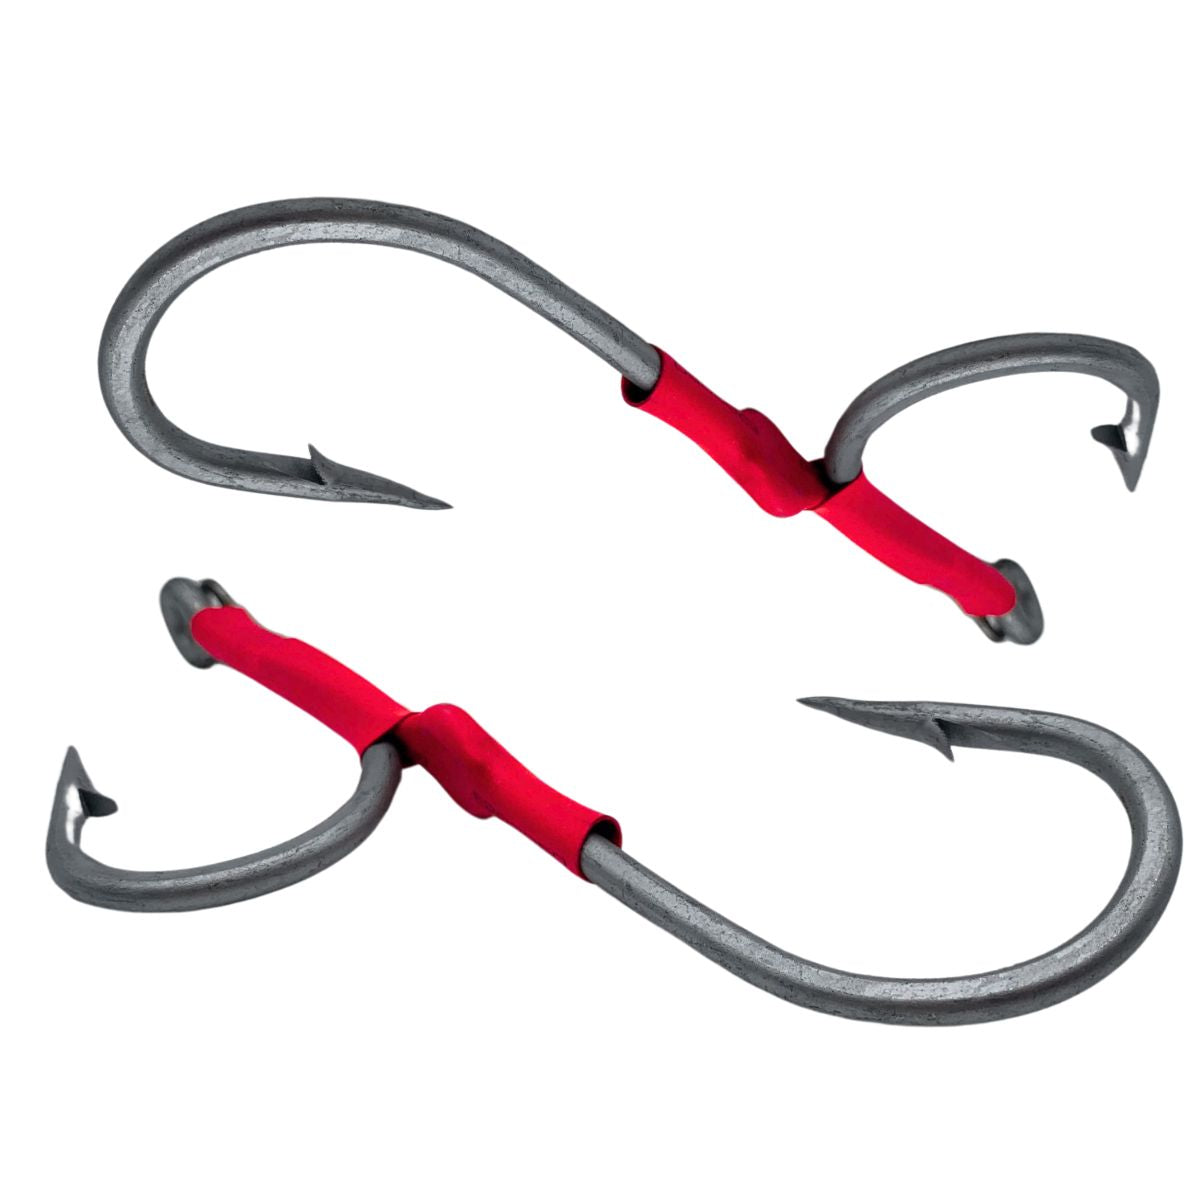 Kamikaze - 2 Game Lure Assist Hook 11/0 D-Shackle Rigs Twin Pack - South East Clearance Centre